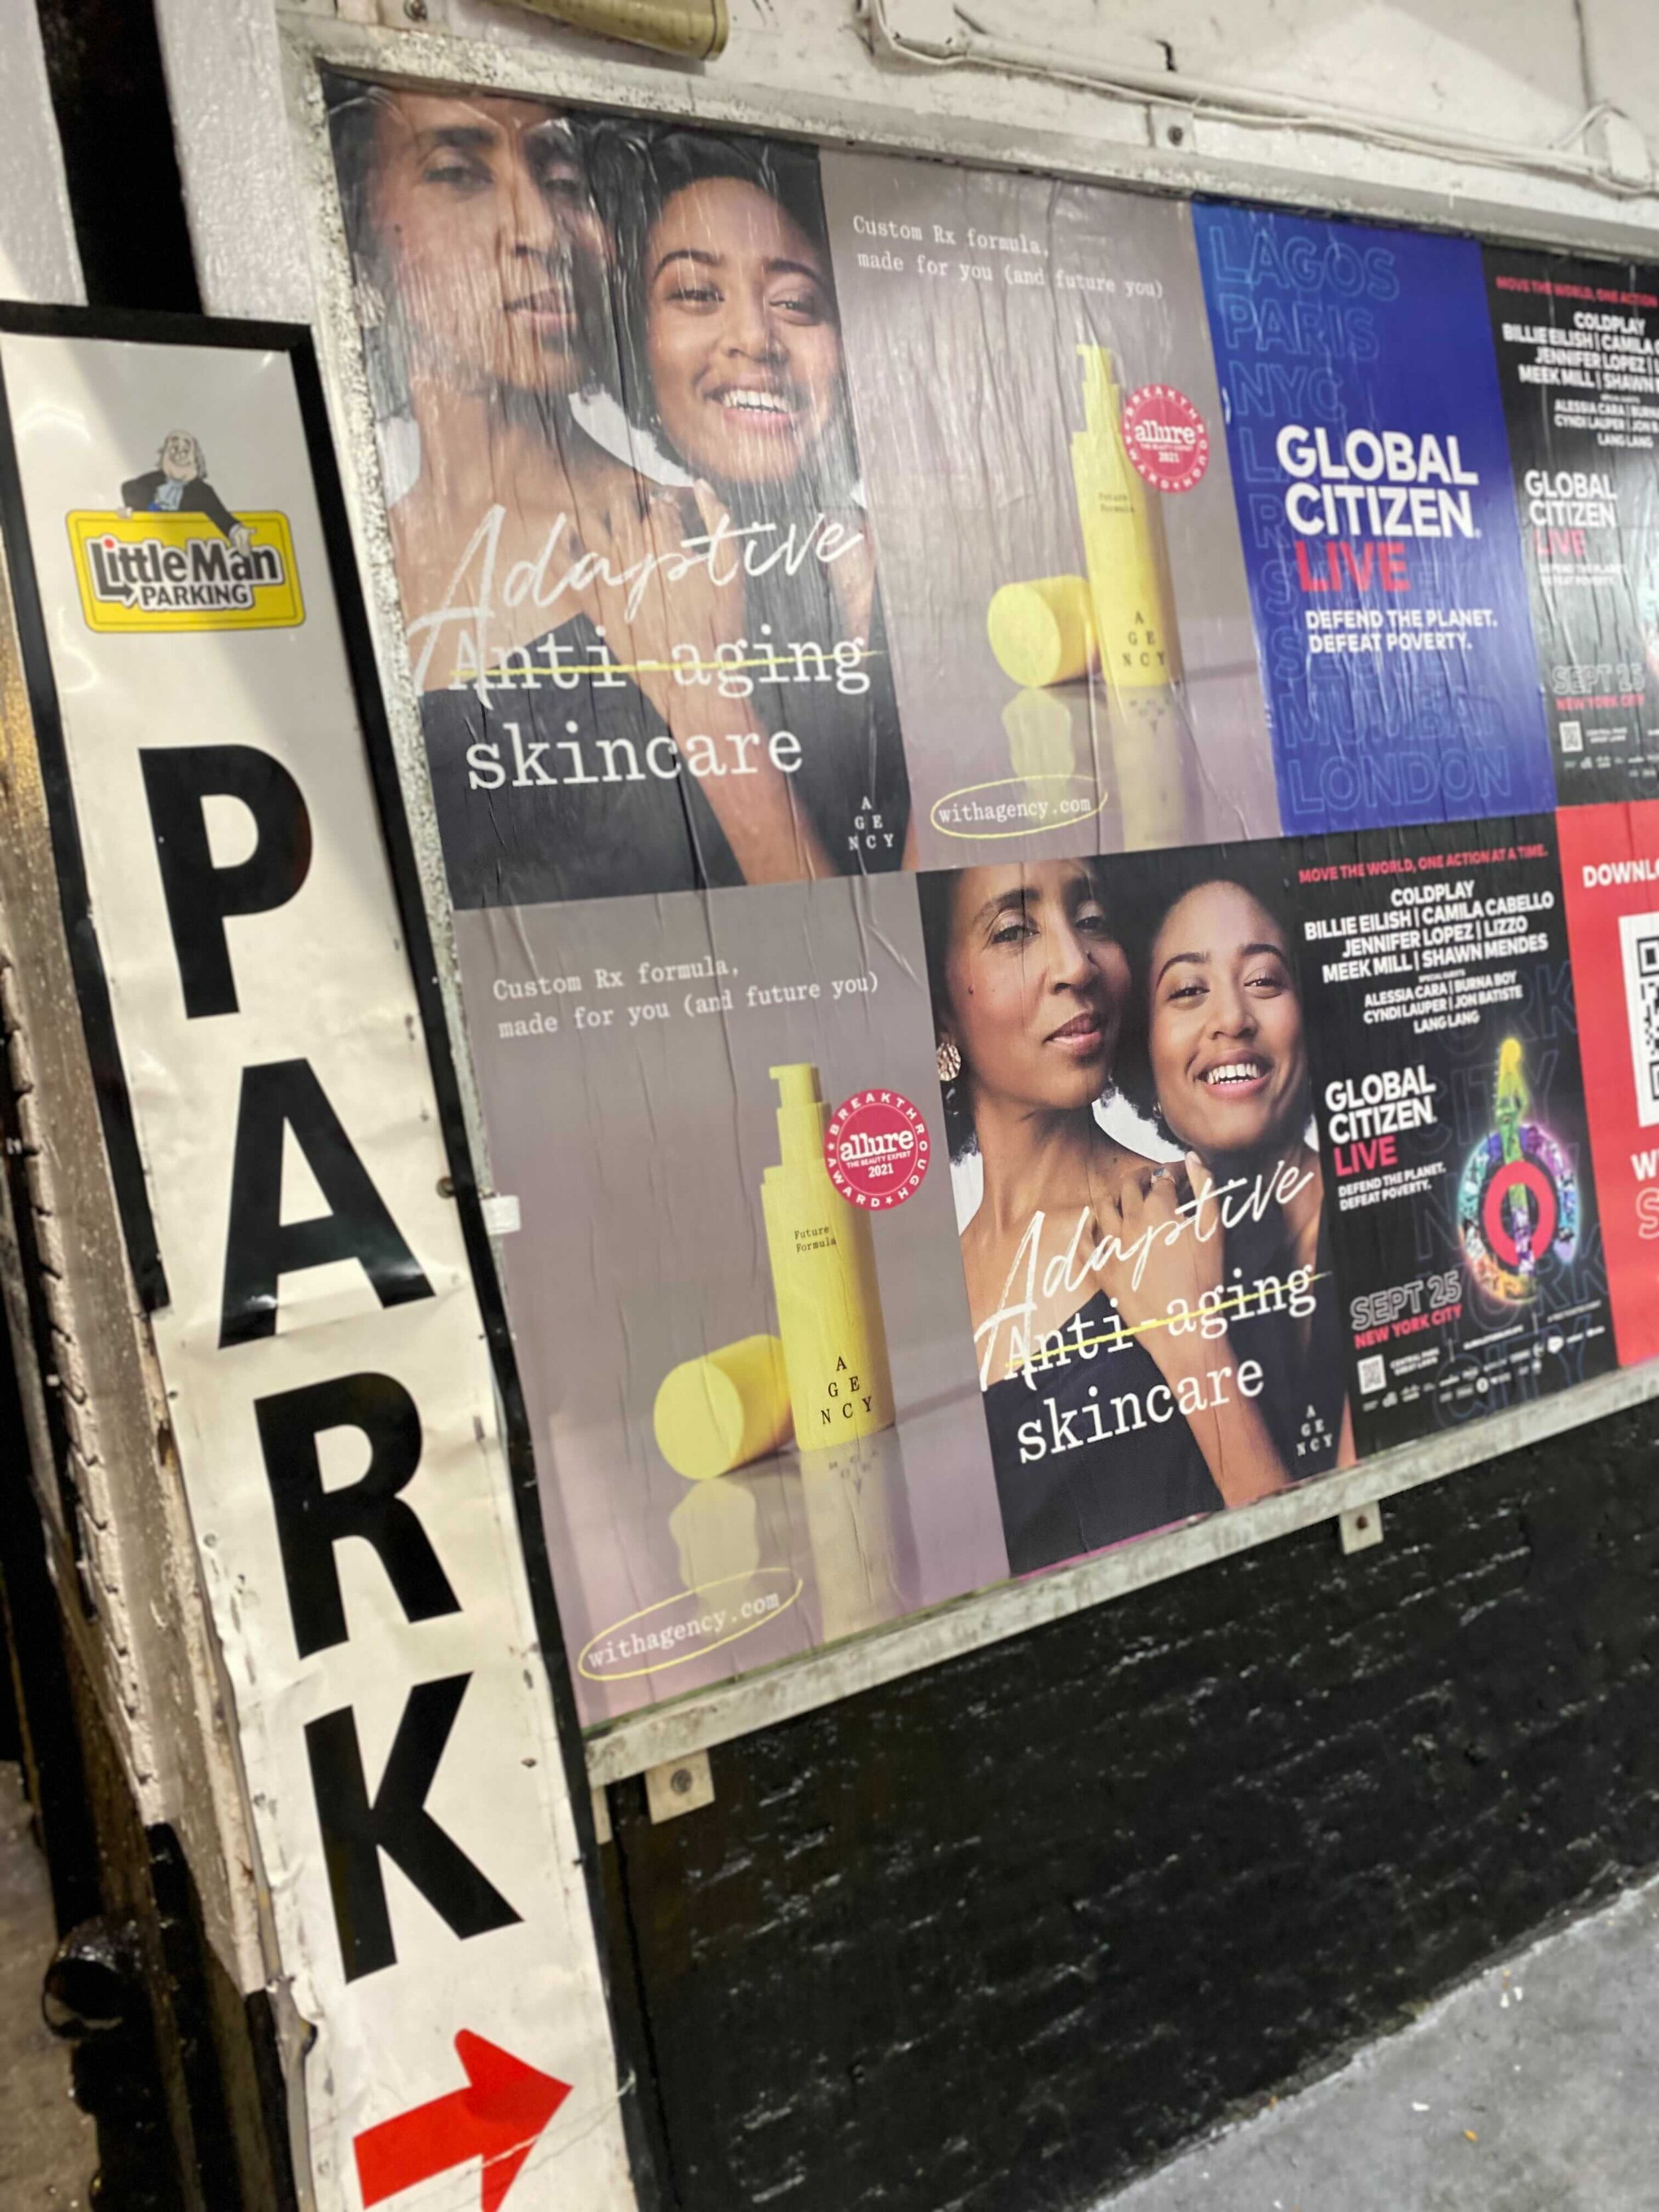  Ads in East Village - NYC 